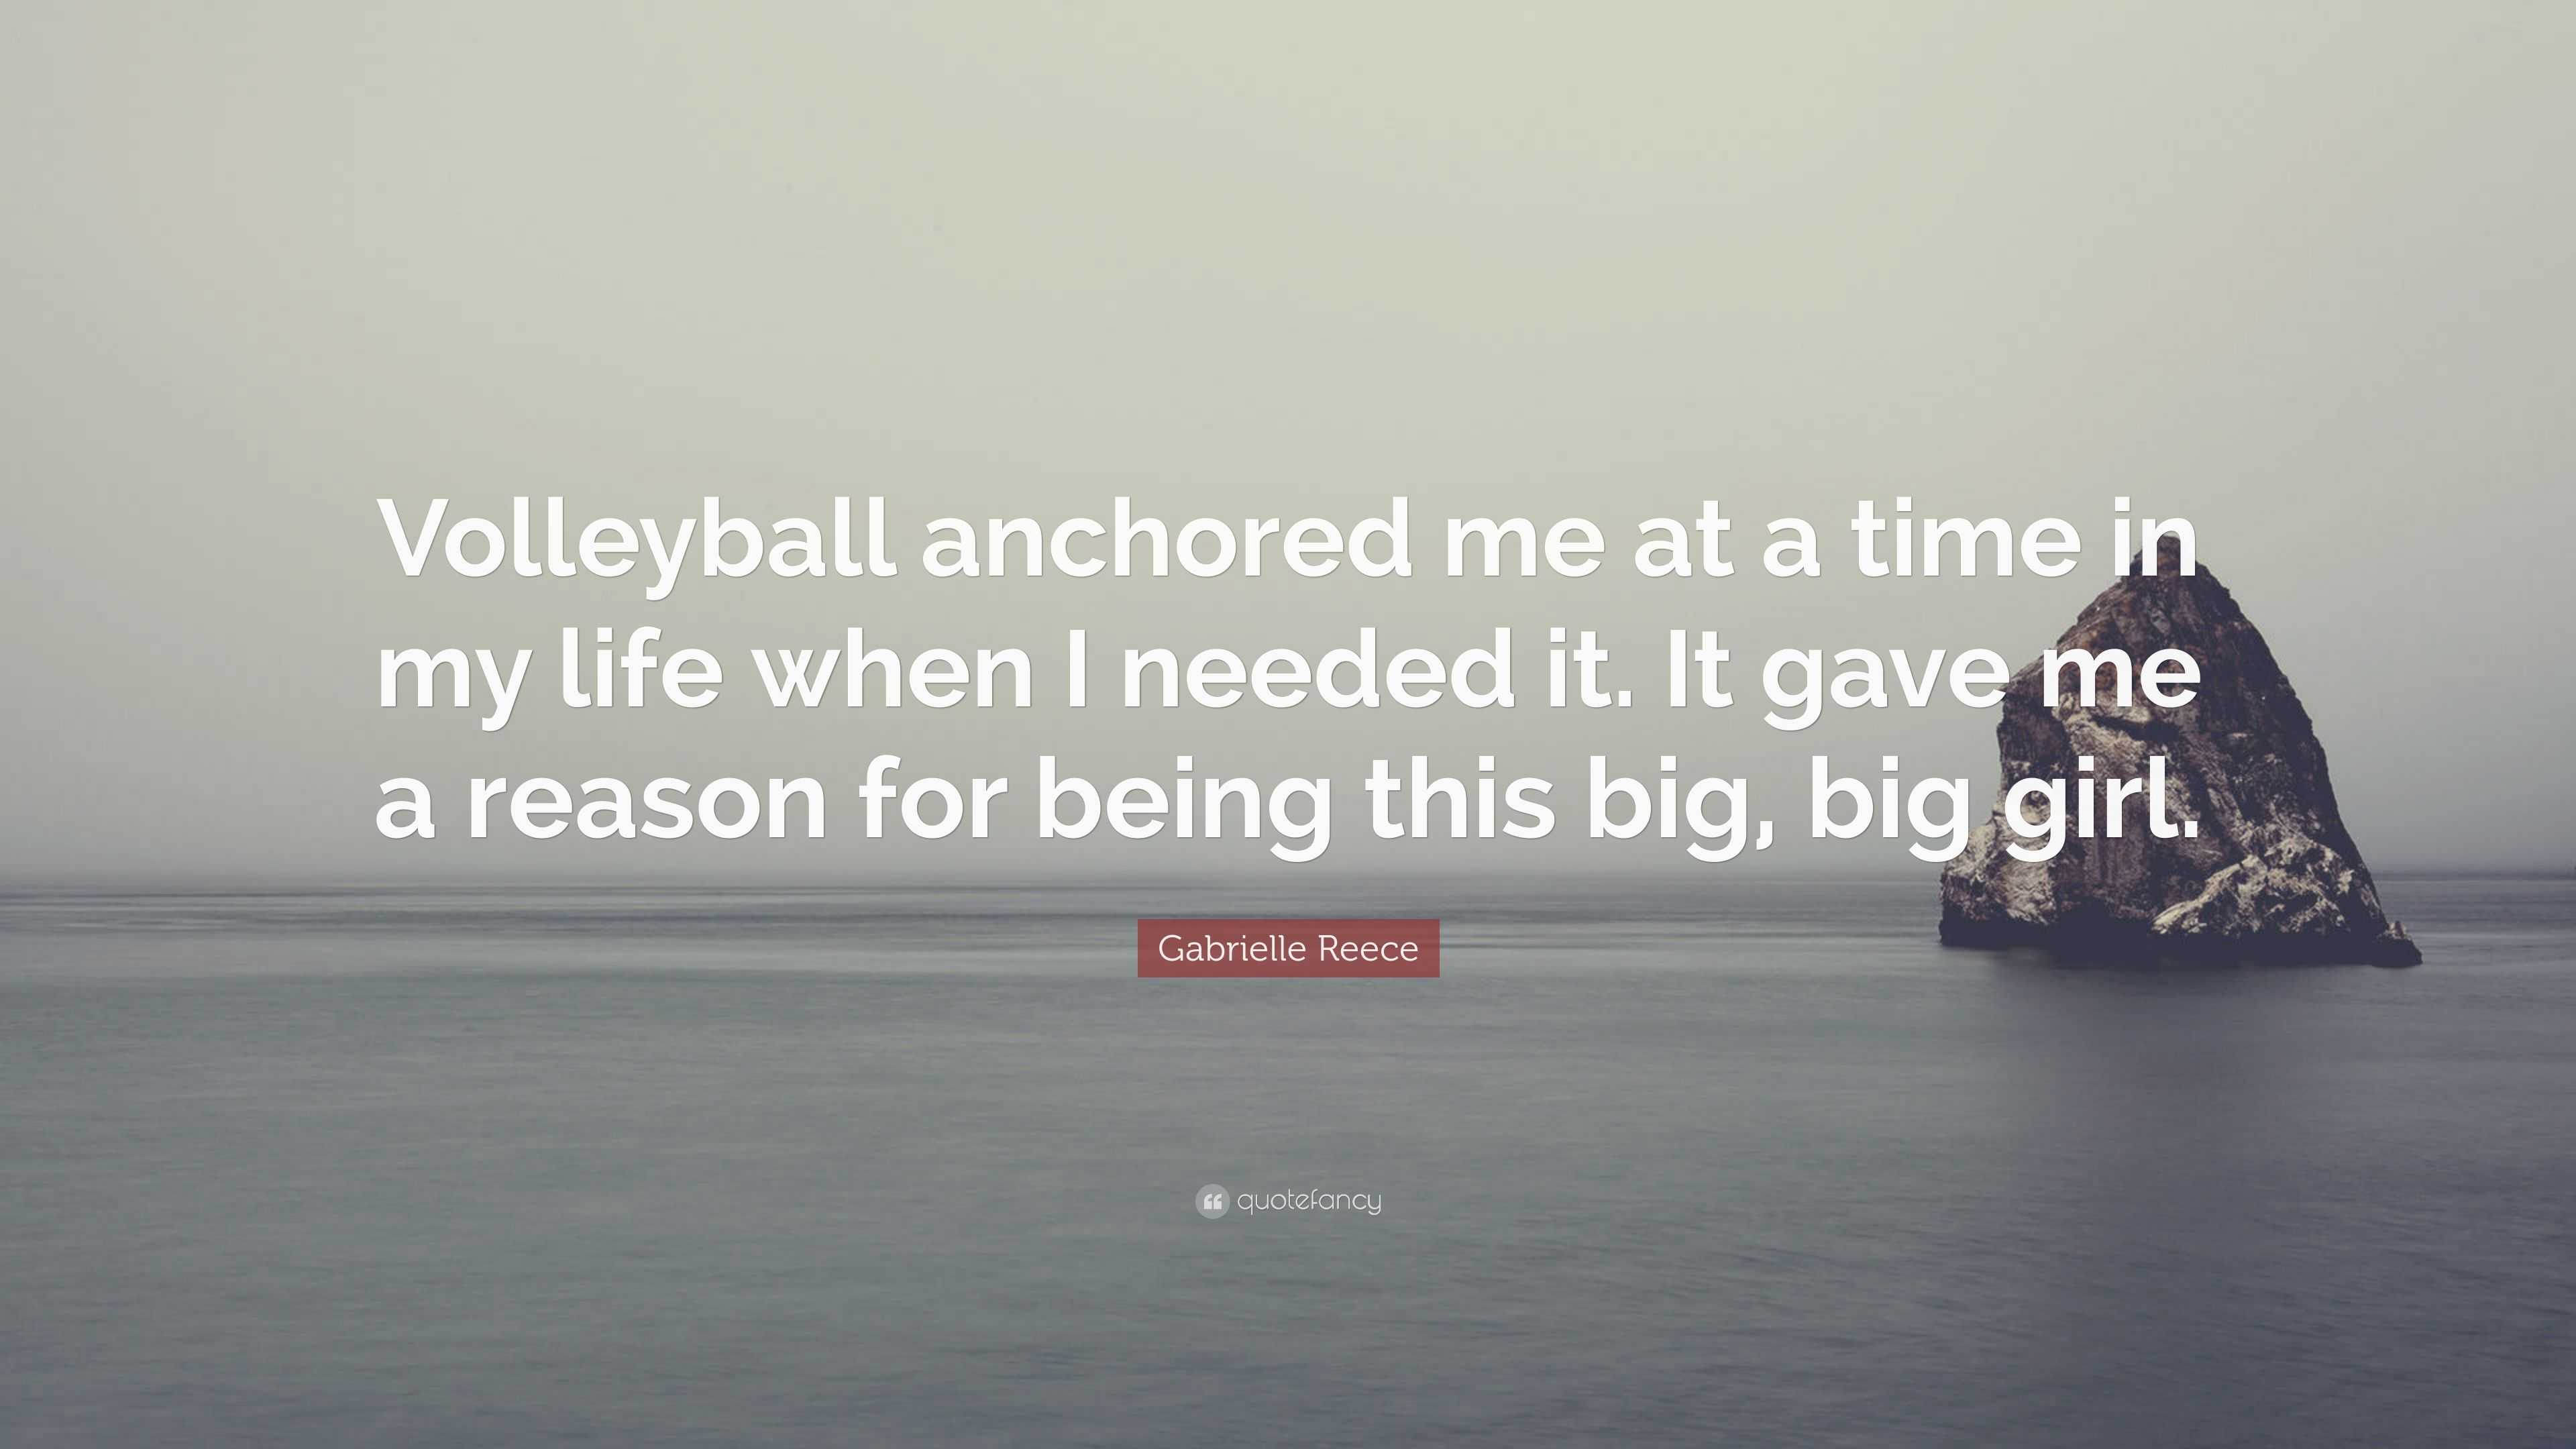 Gabrielle Reece Quote: “Volleyball anchored me at a time in my life ...